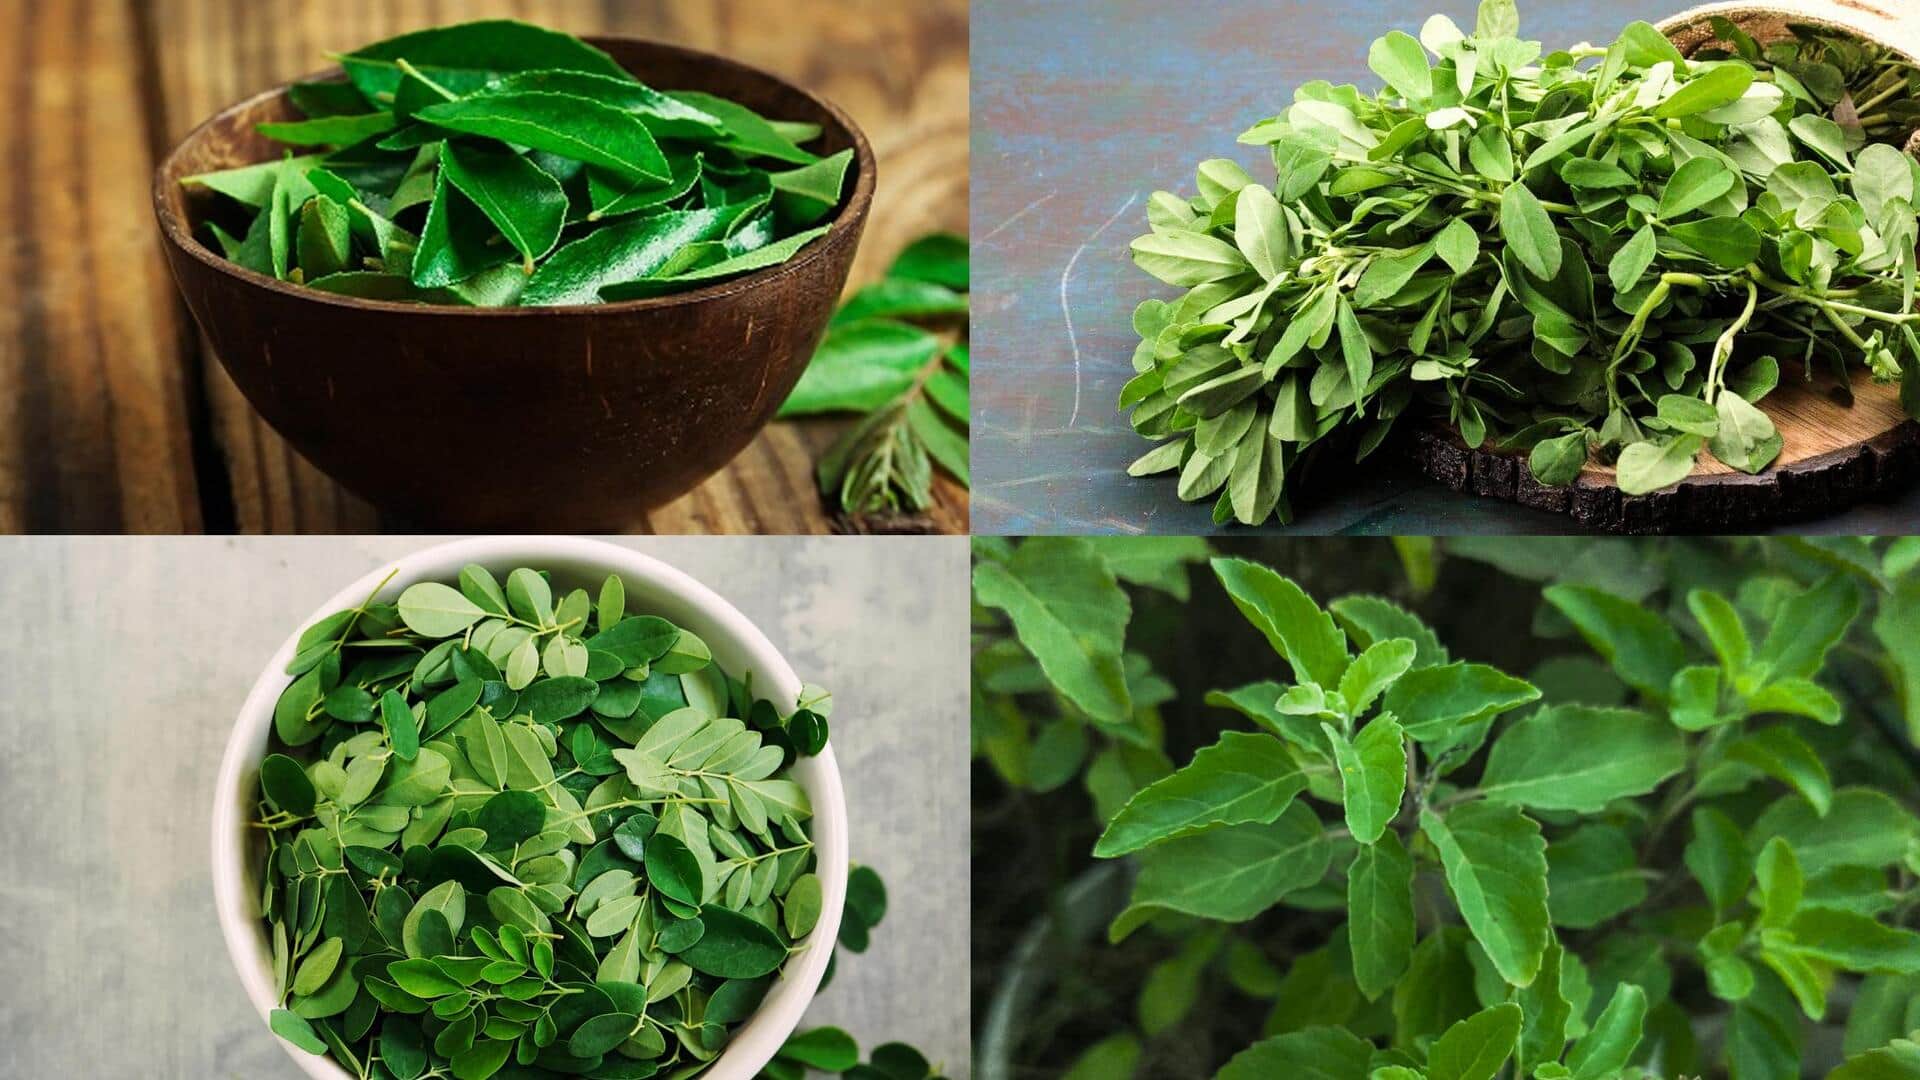 Reduce blood sugar by adding these leaves to your diet